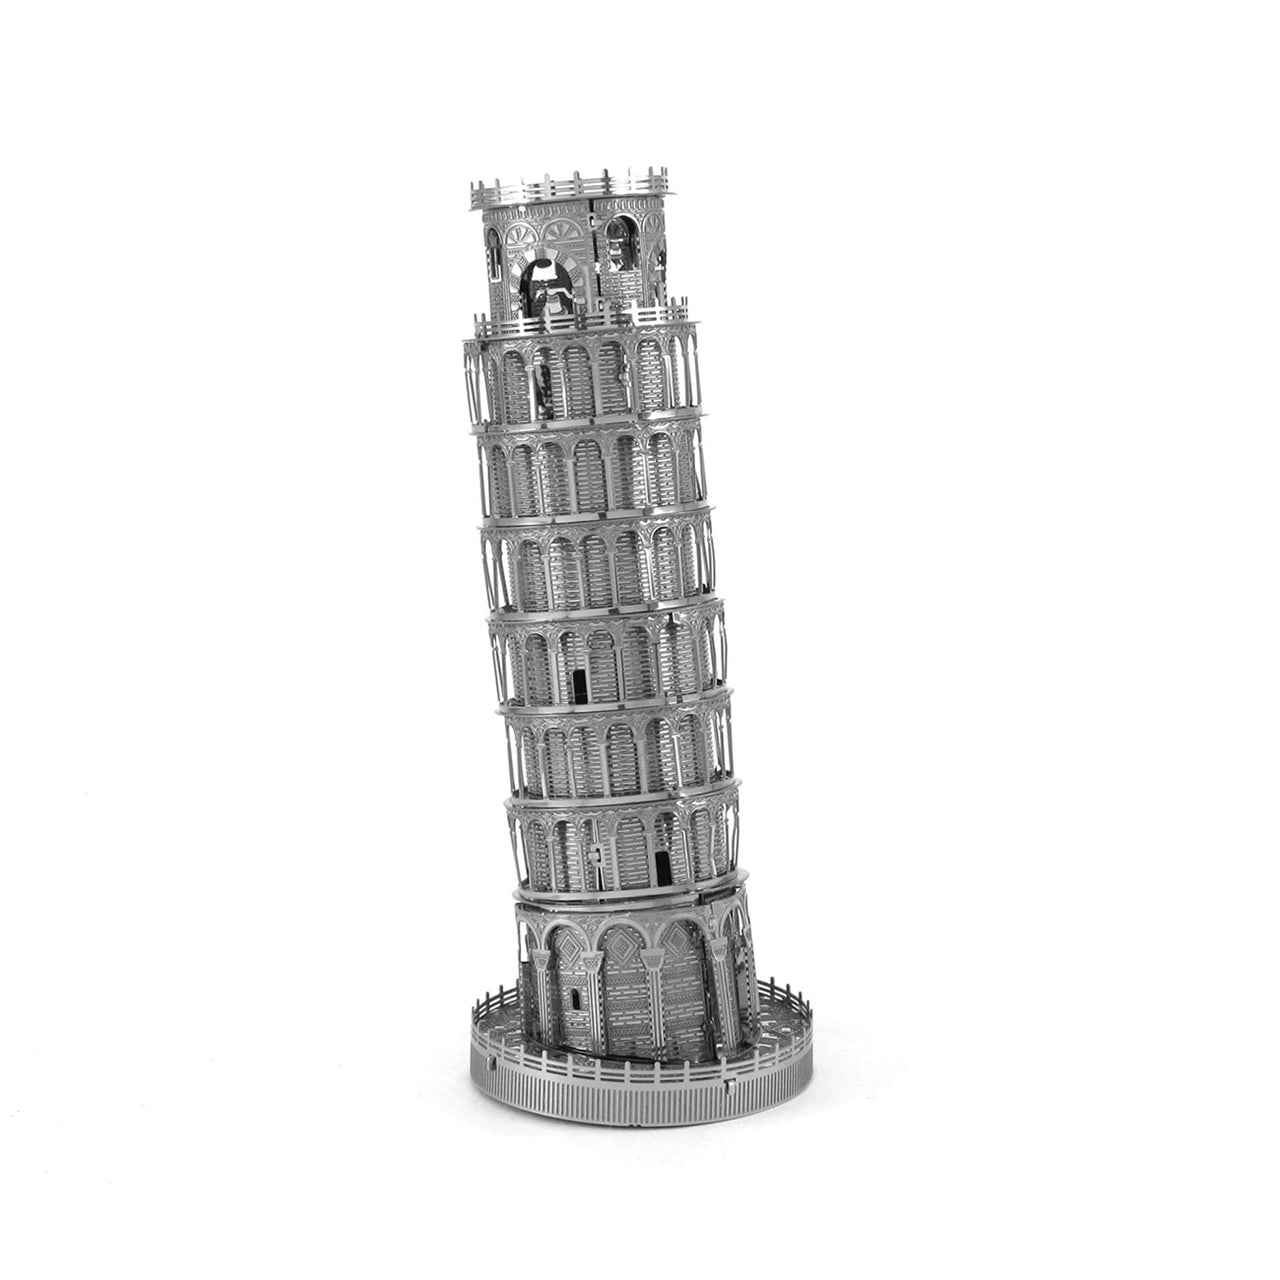 ICX015 Leaning Tower of Pisa (Buildable) 